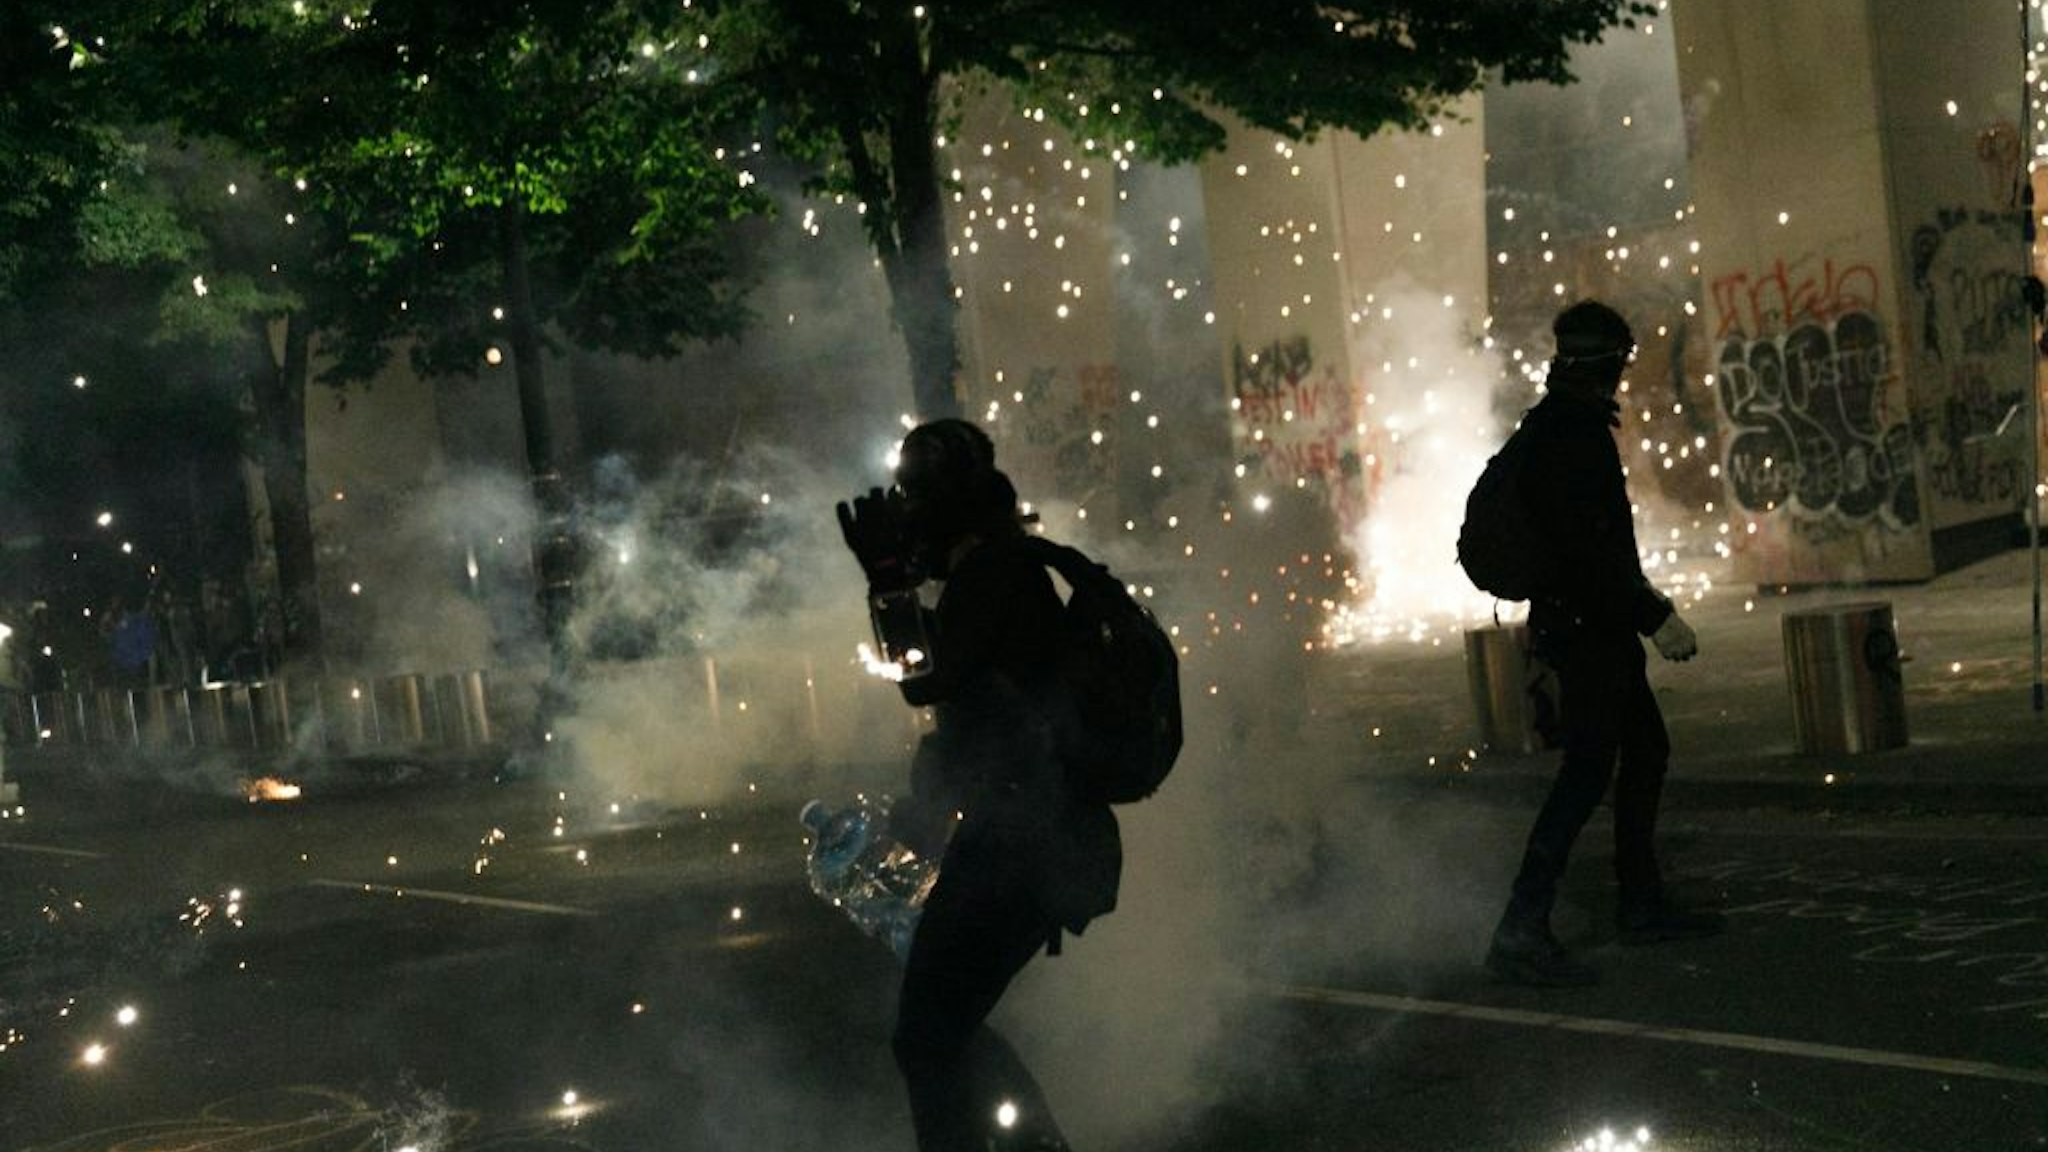 Tear gas and fireworks mix as Black Lives Matter supporters demonstrate in Portland, Oregon on July 4, 2020 for the thirty-eighth day in a row at Portland's Justice Center and throughout Portland,